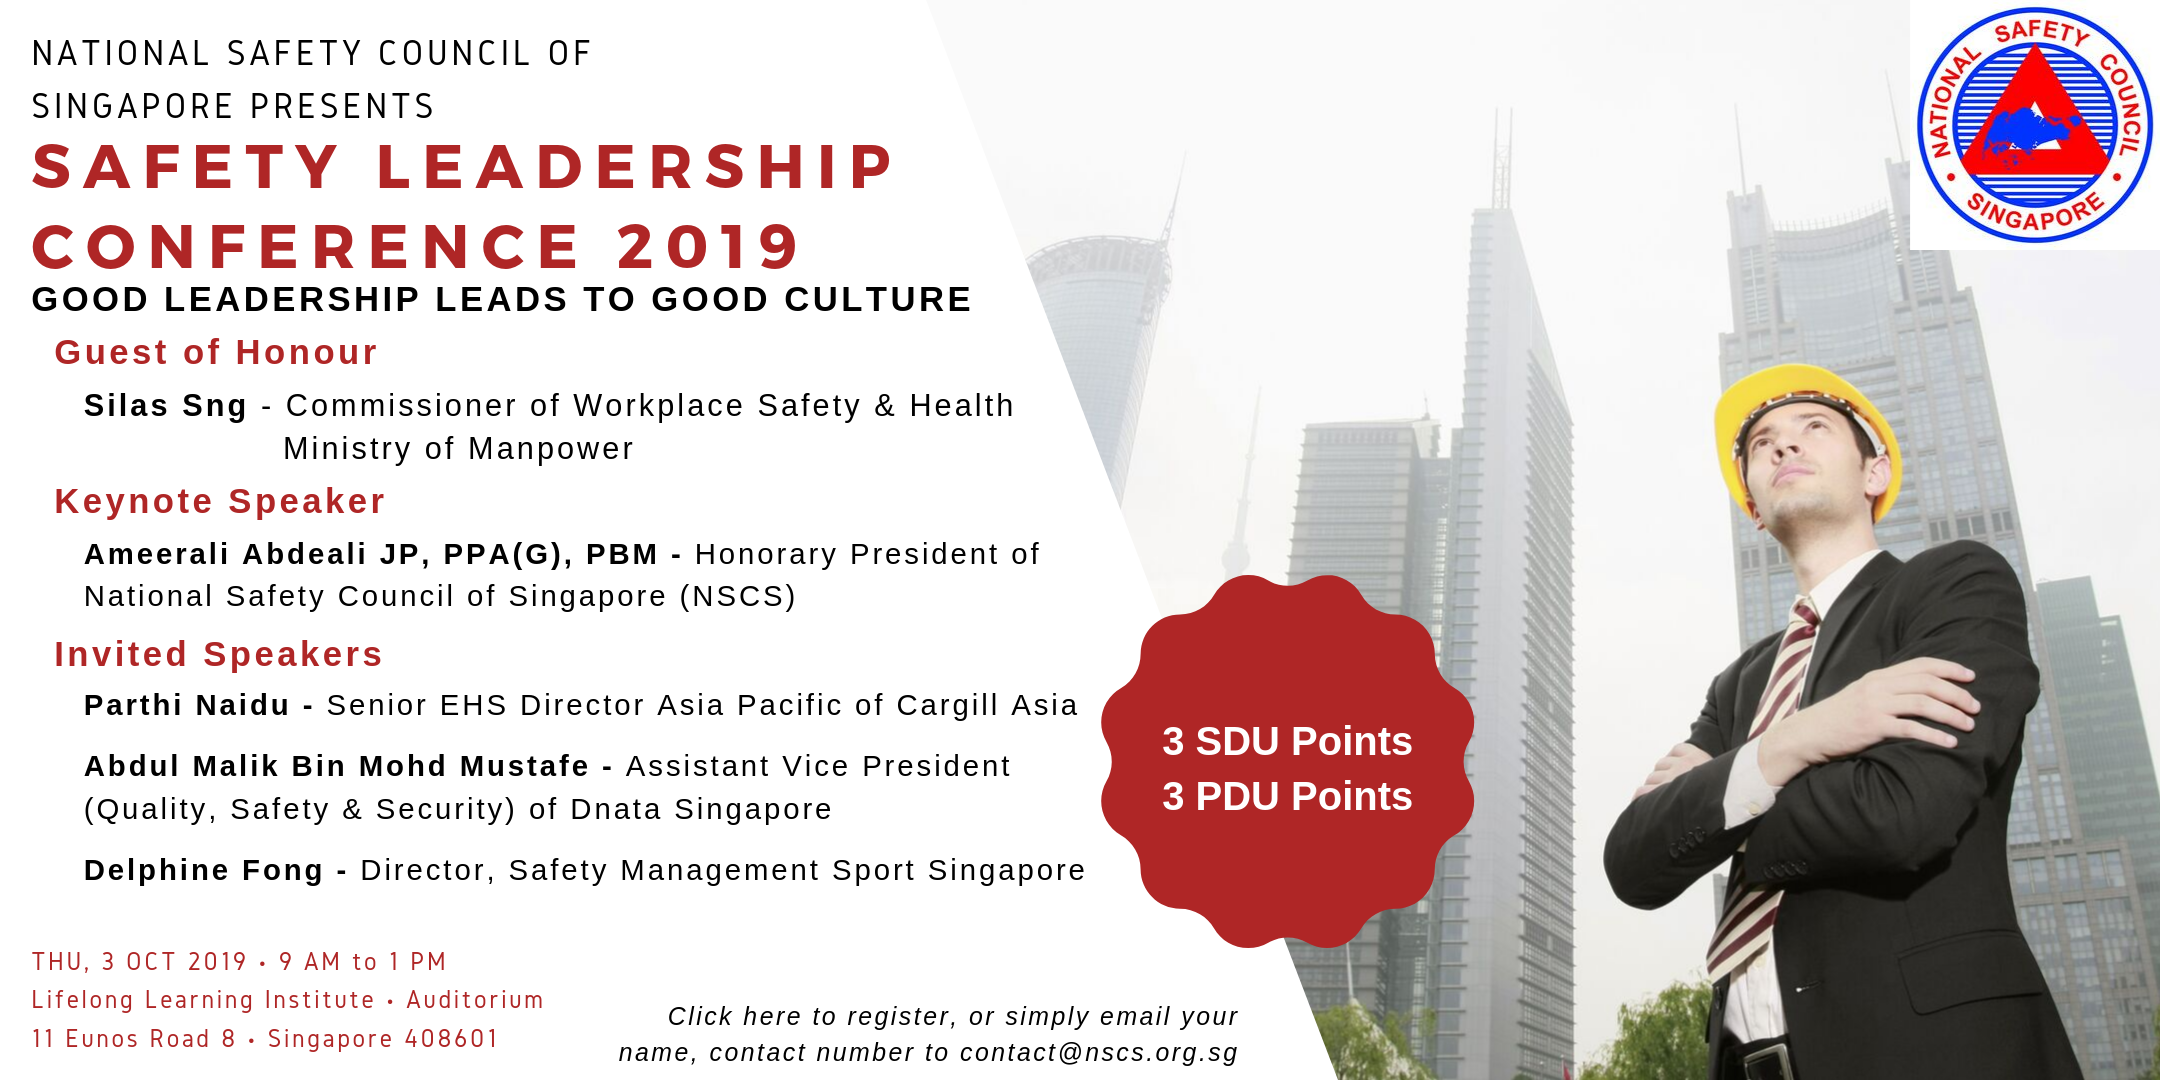 National Safety Council of Singapore Safety Leadership Conference 2019